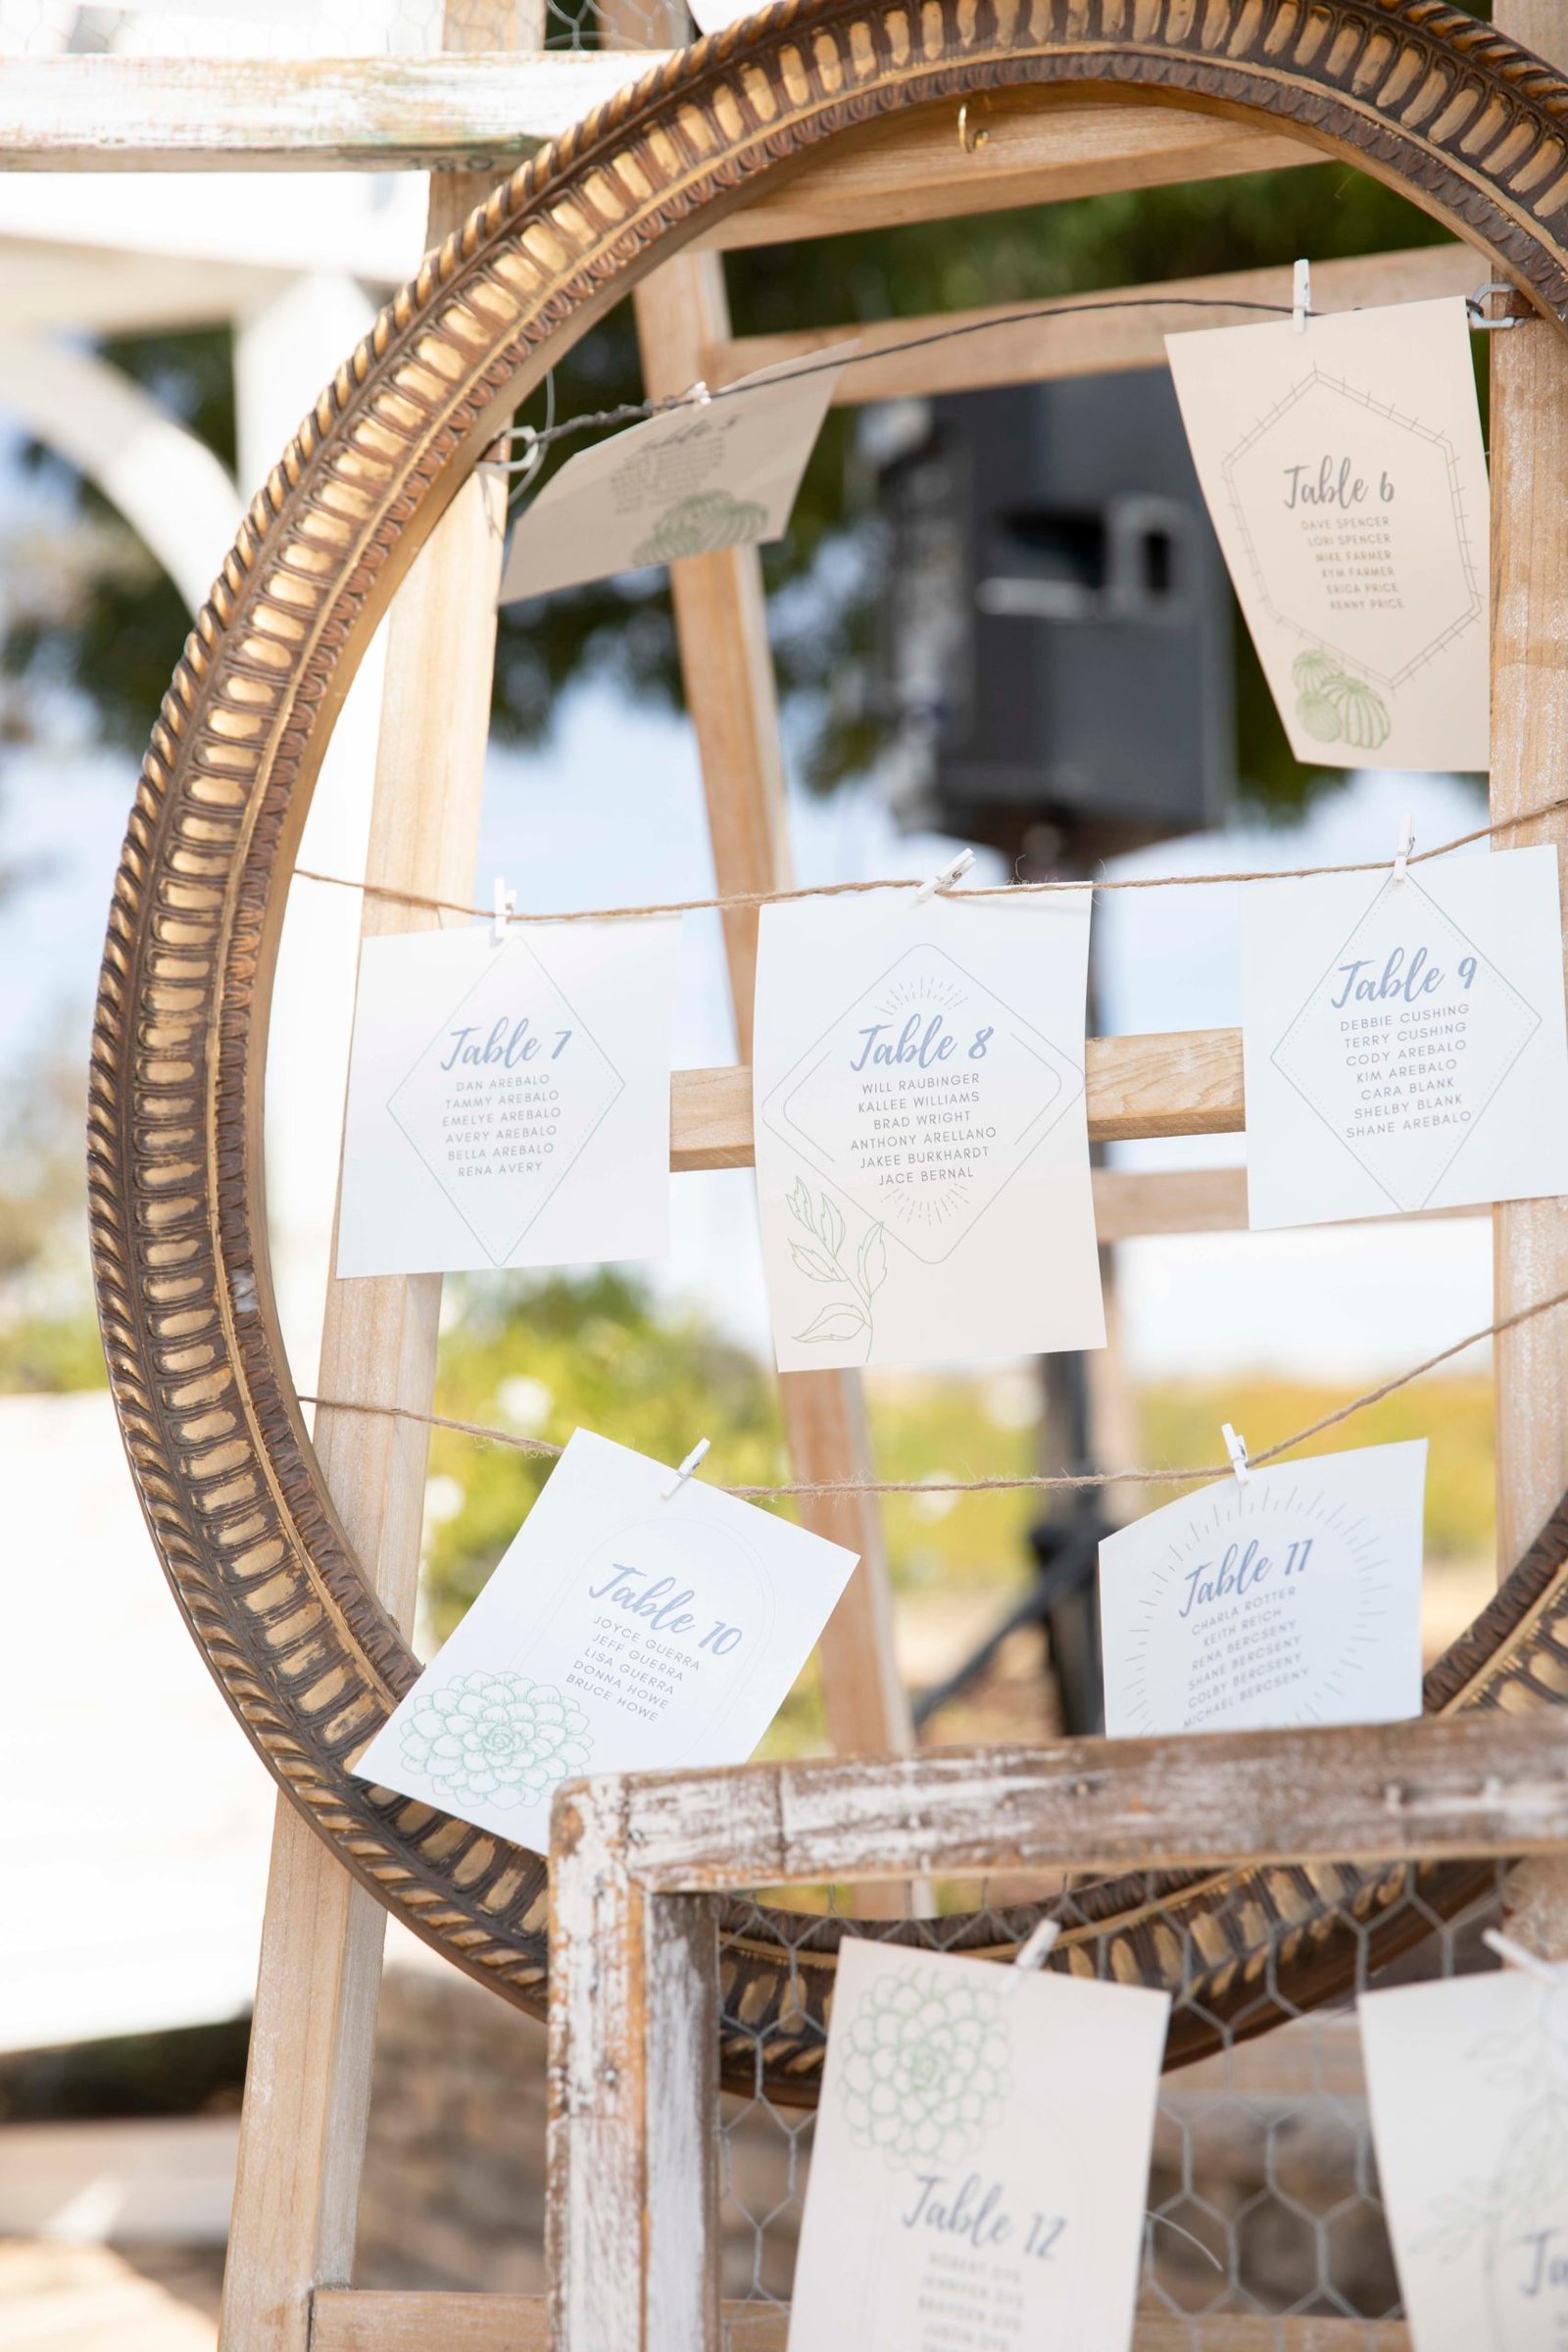 Seating assignments for a wedding at Roblar Winery in Santa Ynez, CA